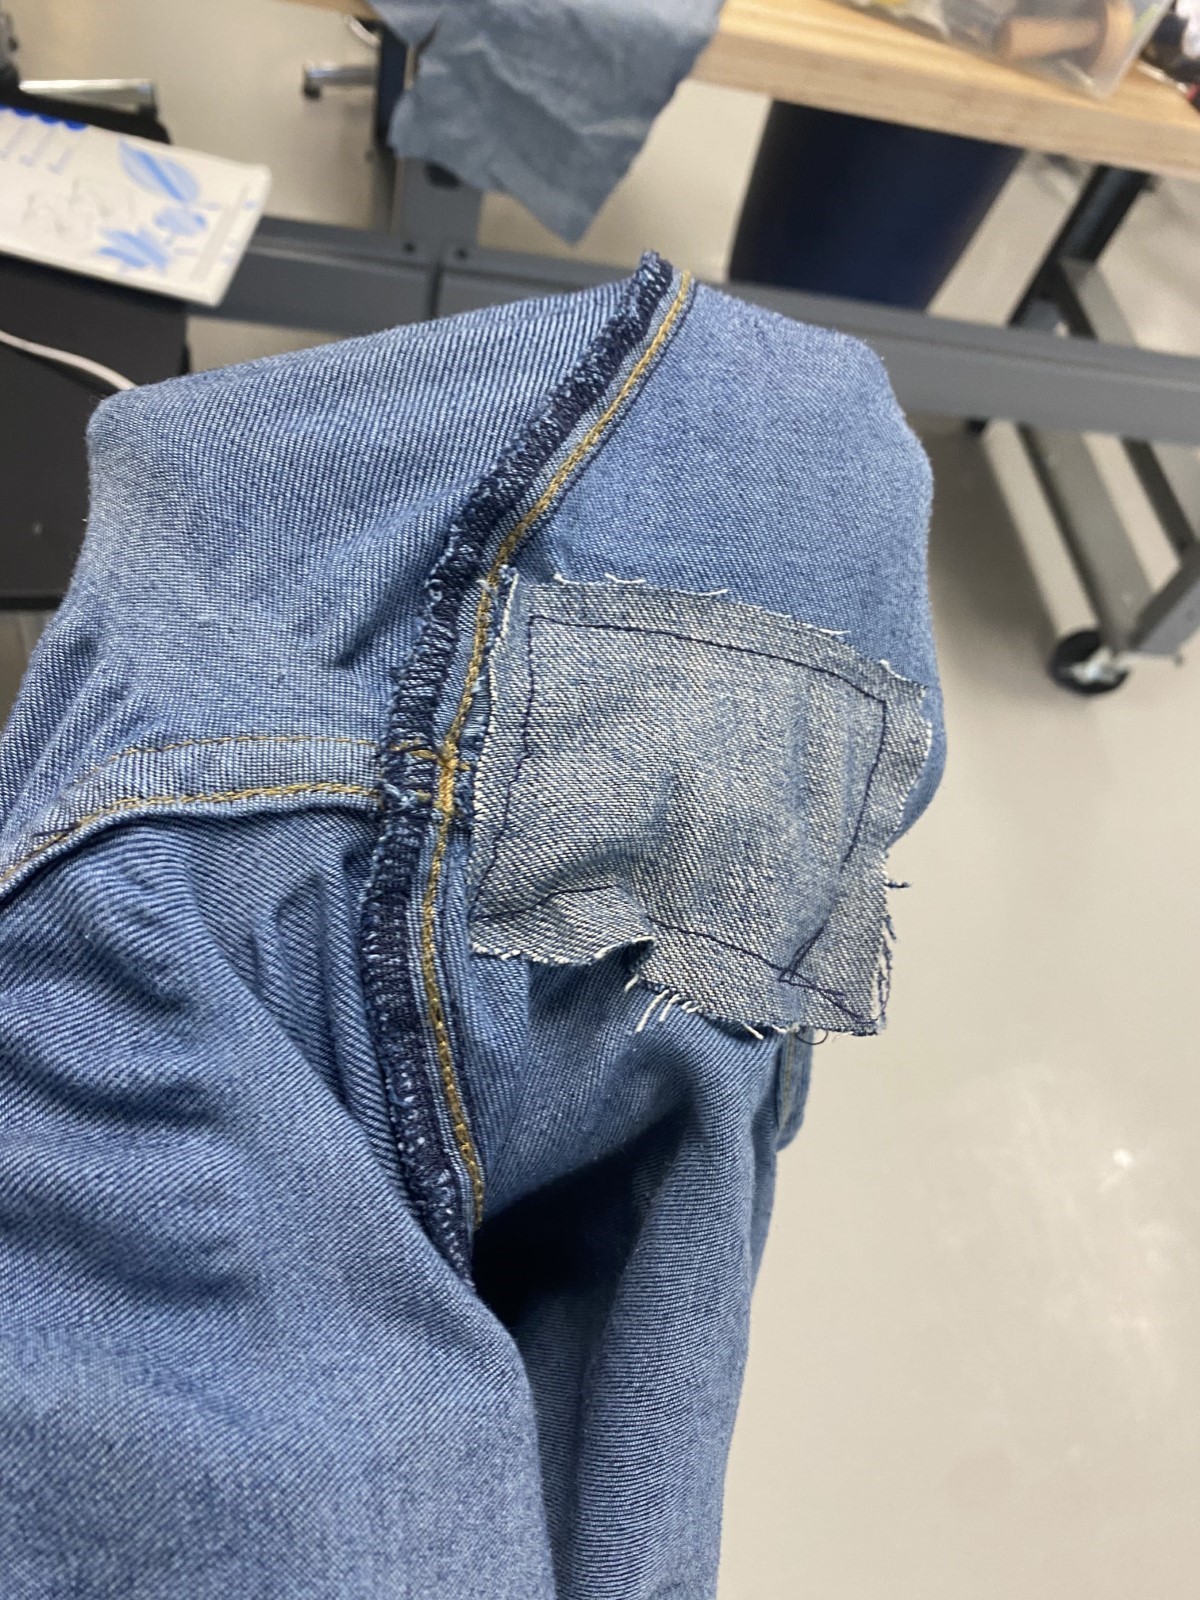 interior of jeans with a denim patch sewed inside